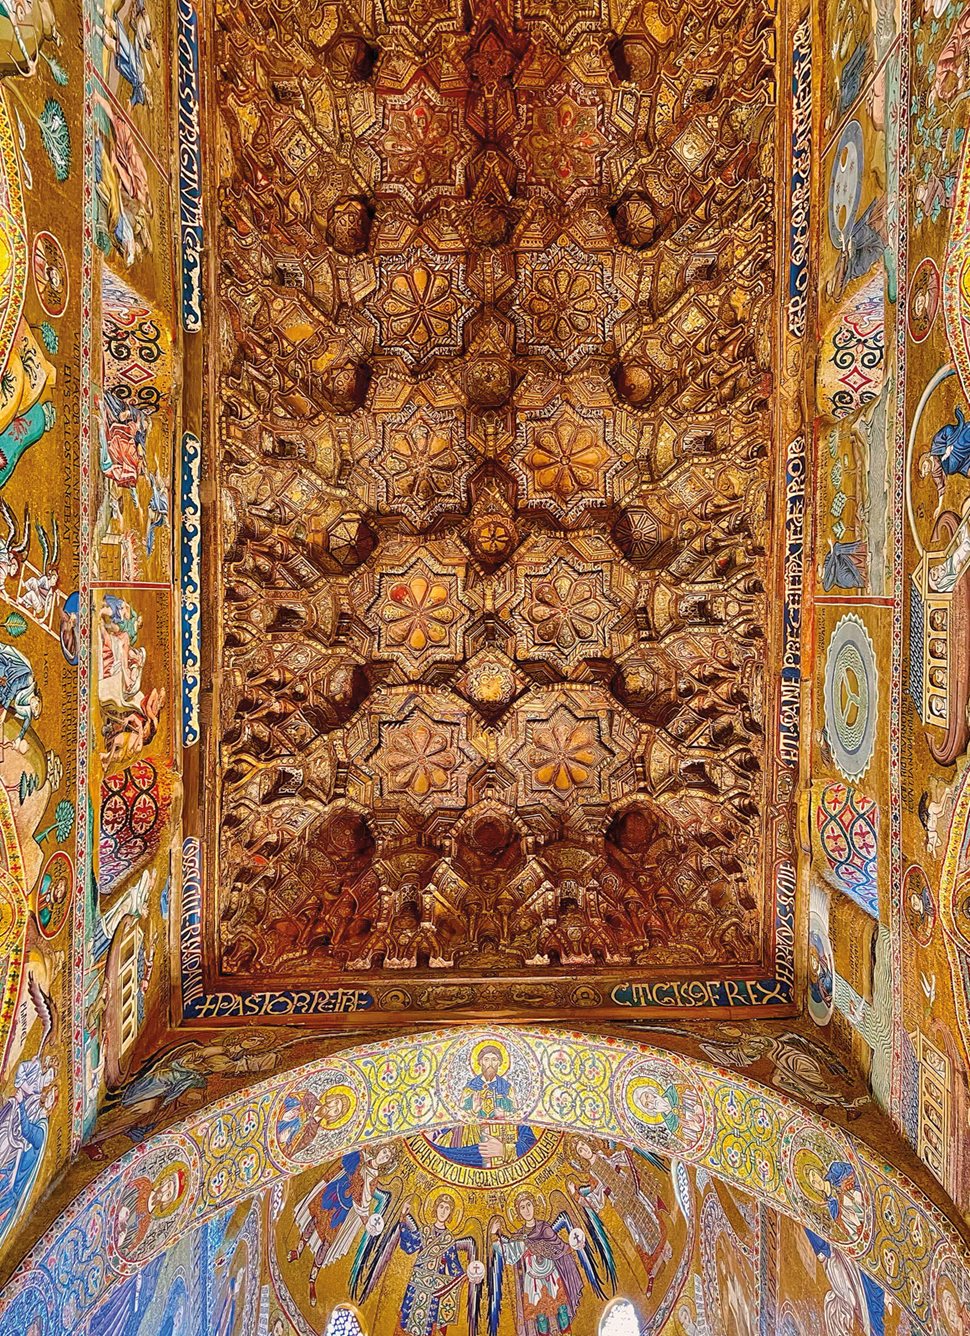 Regarded by art historians as one of the masterpieces of medieval Islamic workmanship, the painted wooden ceiling of the Capilla Palatina mesmerizes and enchants with its ranks of star-shaped coffers supported by honeycomb muqarnas set above the walls and vaults covered in mosaics executed by Byzantine craftsmen. 